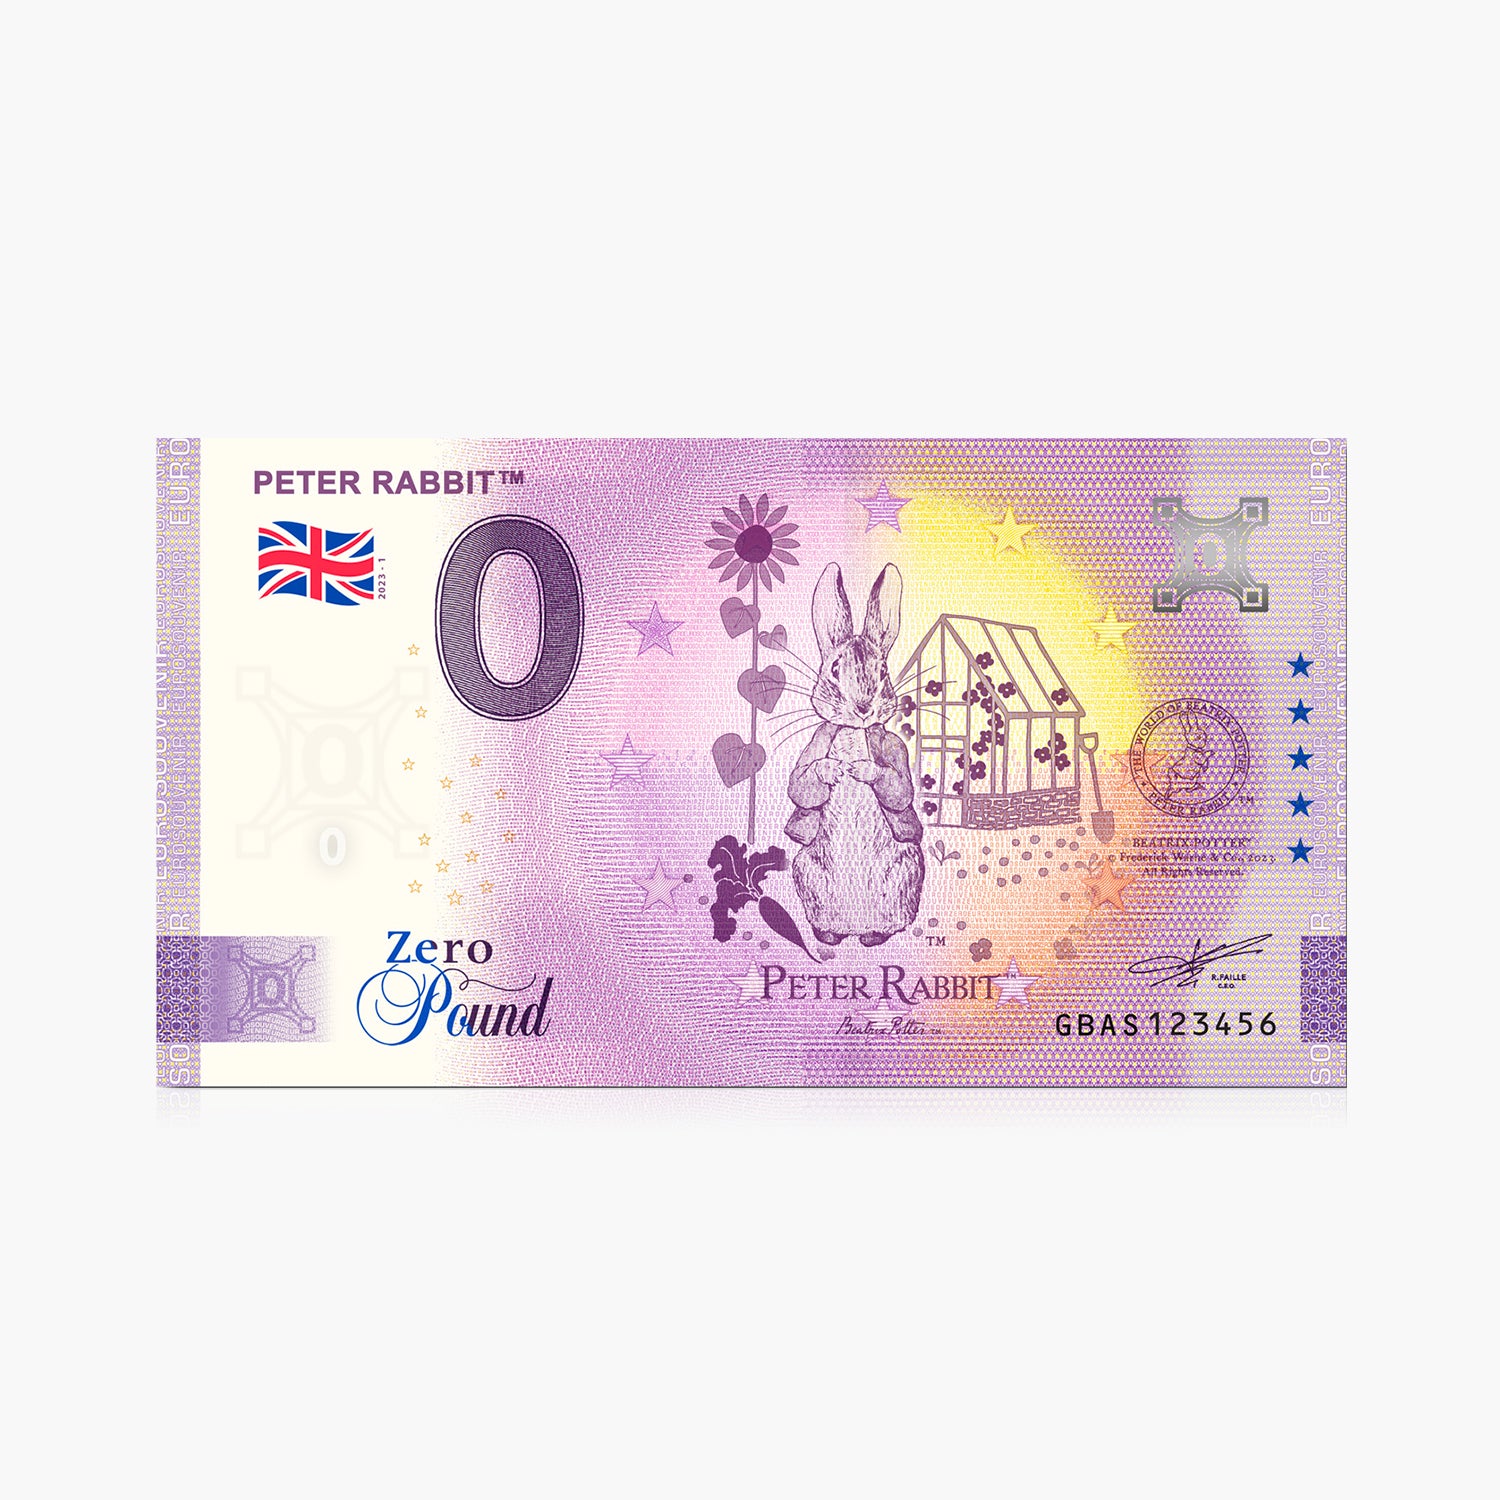 The World of Peter Rabbit £0 Banknote